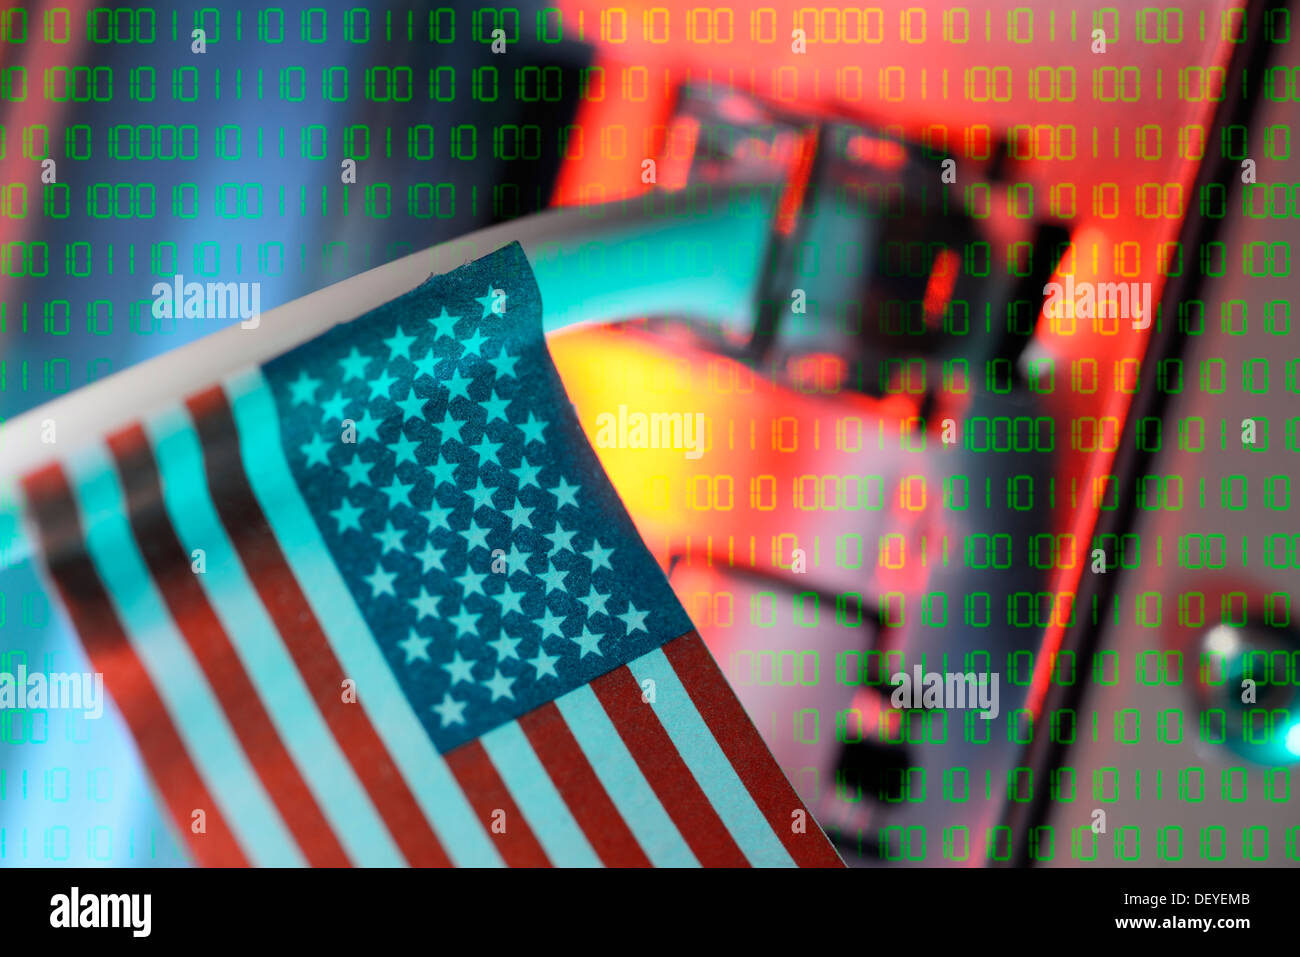 Internet cable with USA flag, prism Spaehprogramm, Internetkabel mit USA-Fahne, Prism Spähprogramm Stock Photo